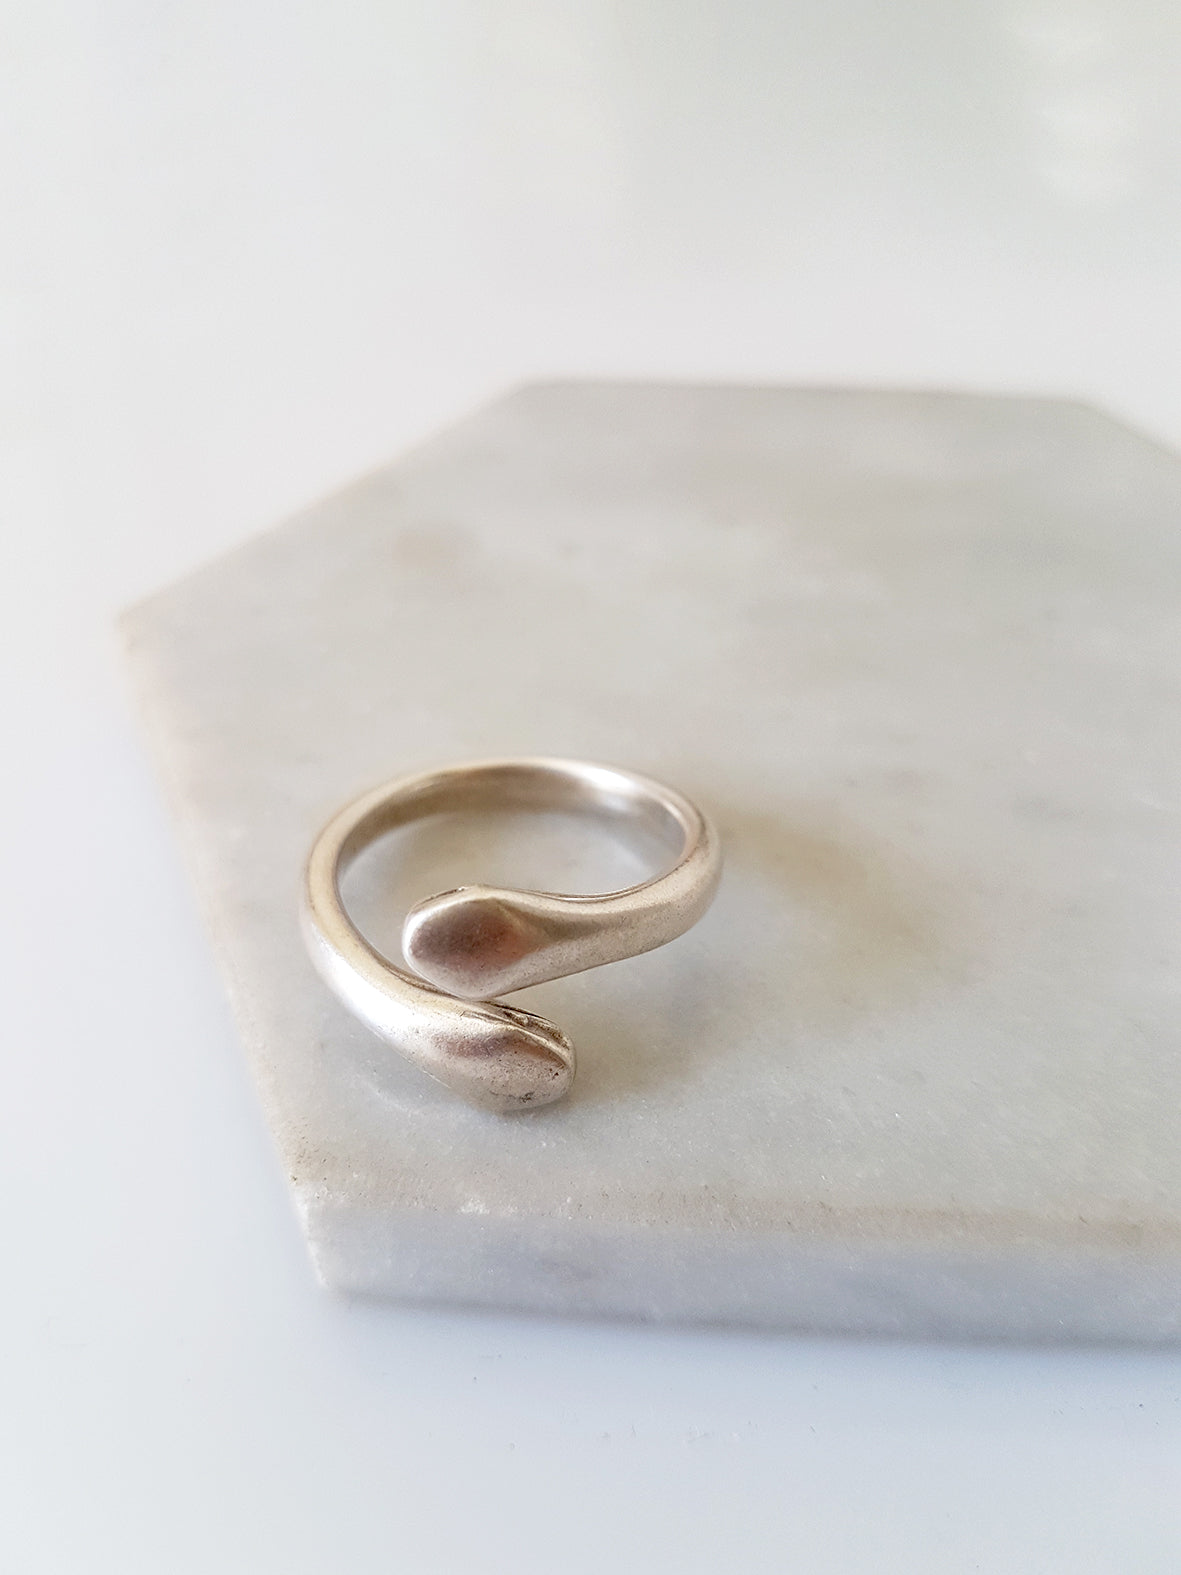 Snake ring with joined edges in a package of 4 pieces